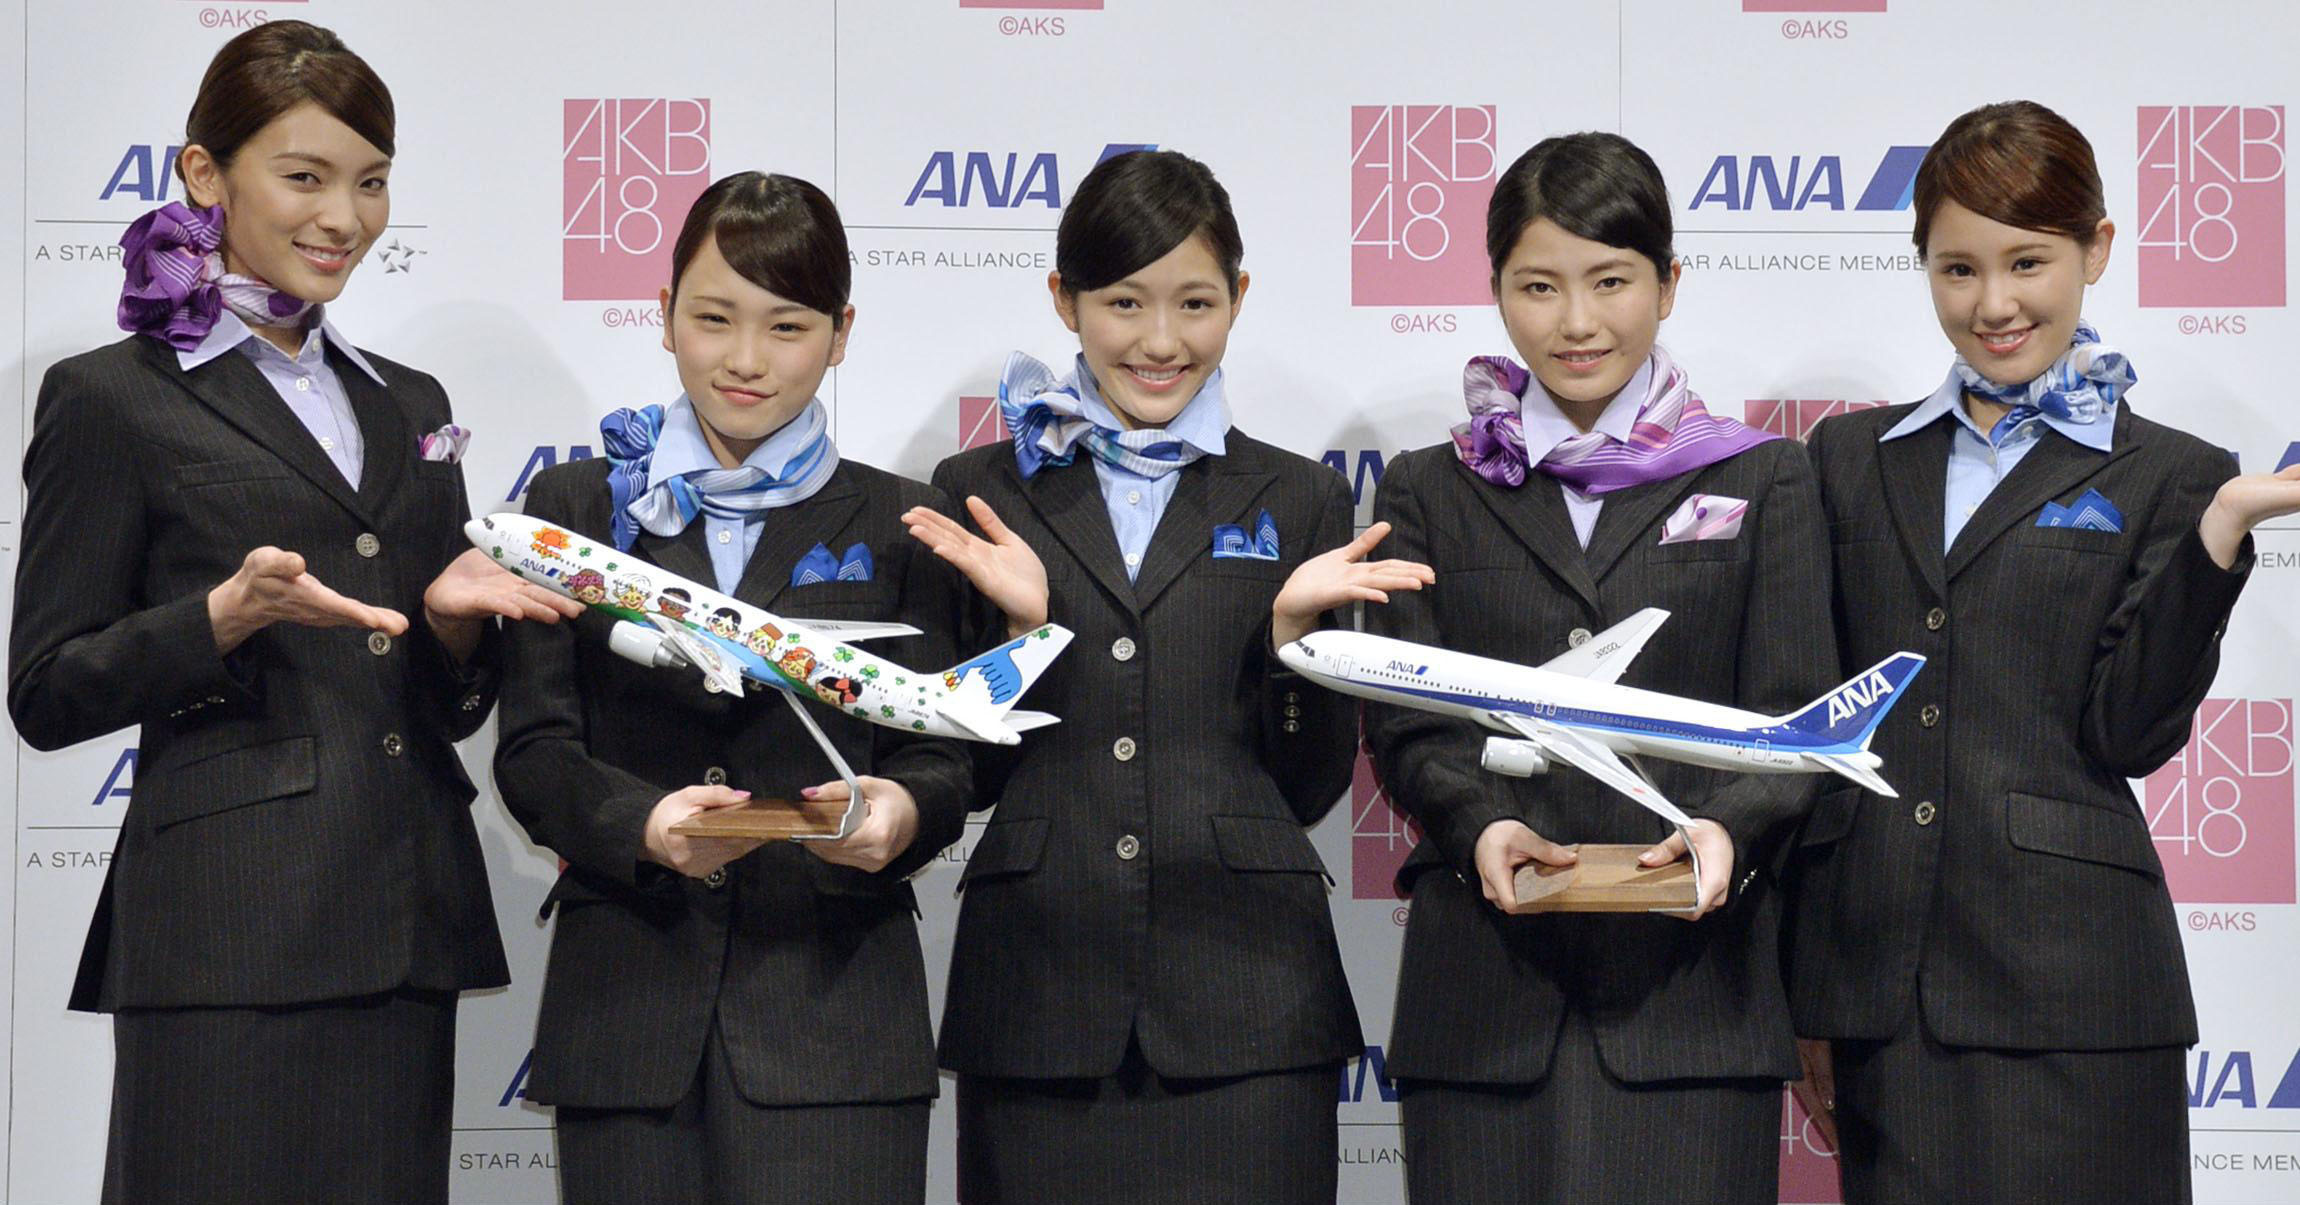 All Nippon Airways, Project with AKB48, Boosting travel in Asia, Collaboration, 2300x1210 HD Desktop